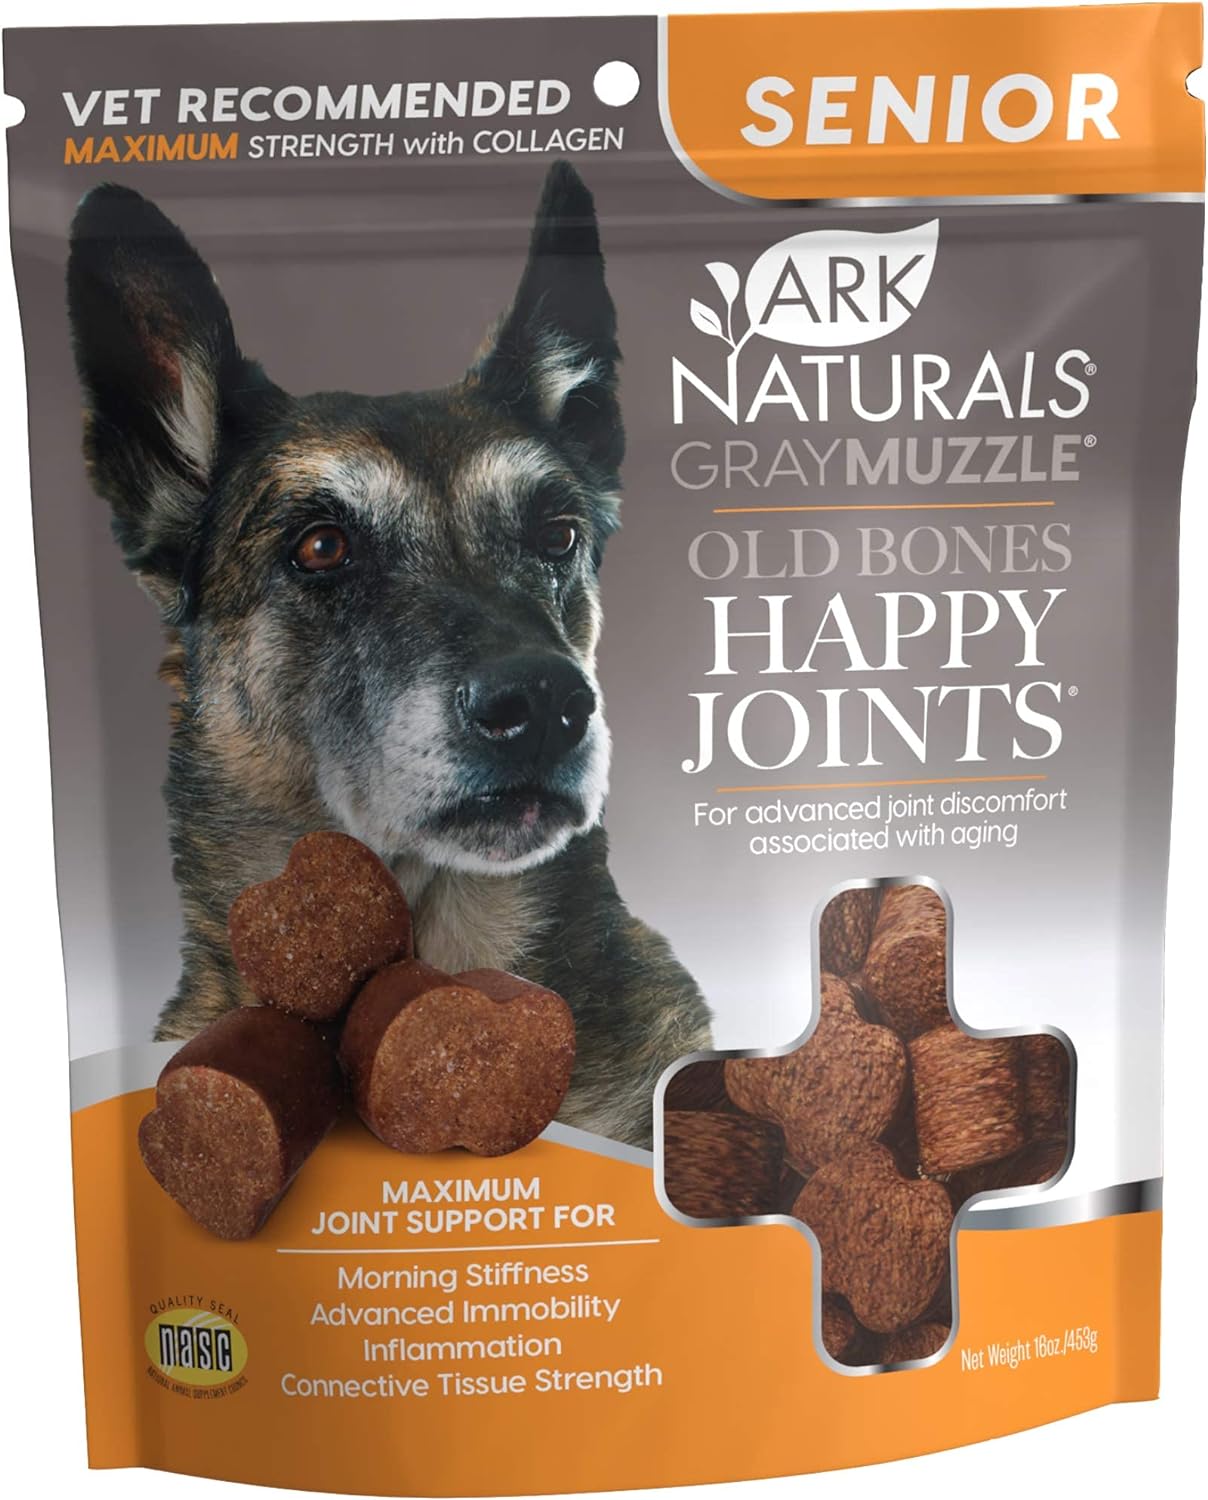 ARK NATURALS Gray Muzzle Old Dogs Happy Joints Chews for Large Breed Dogs, Vet Recommended to Support Cartilage and Joint Function, 500 mg Glucosamine, 16.5 oz Bag, Packaging May Vary (71008)